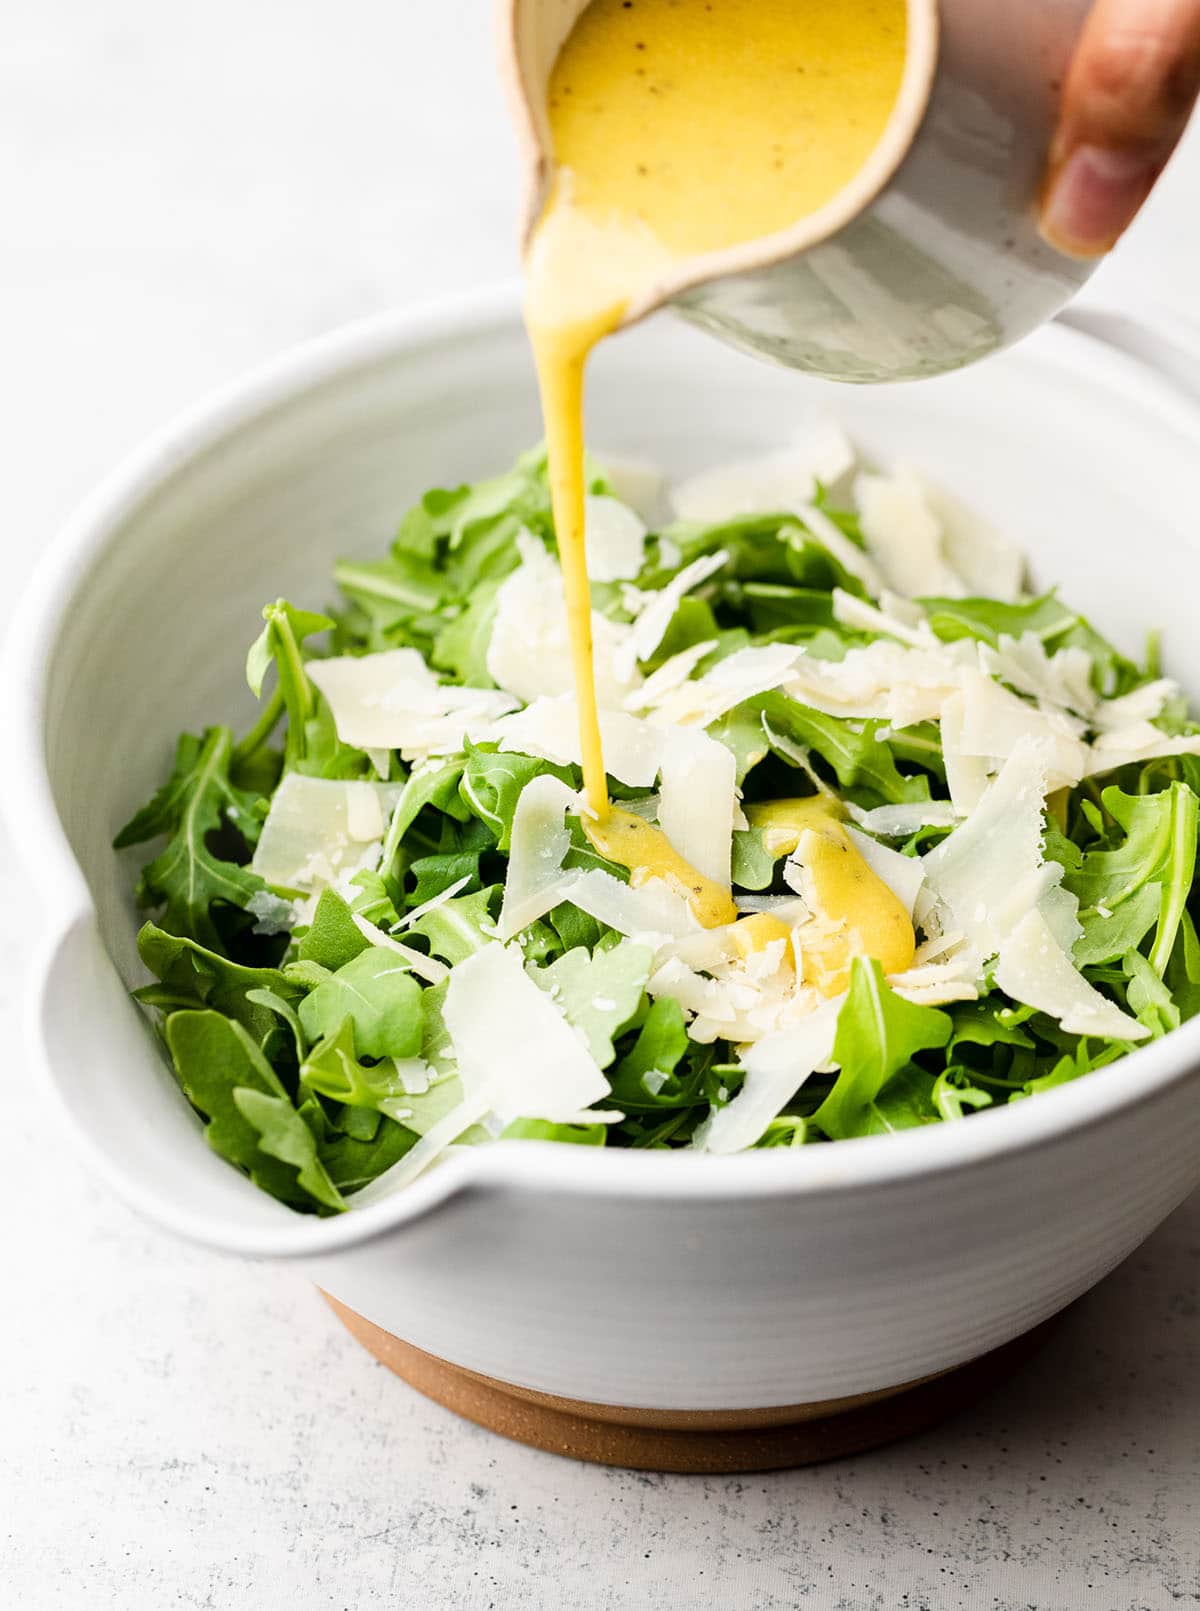 Hand pouring dressing over fresh arugula and parmesan cheese in a large white bowl.